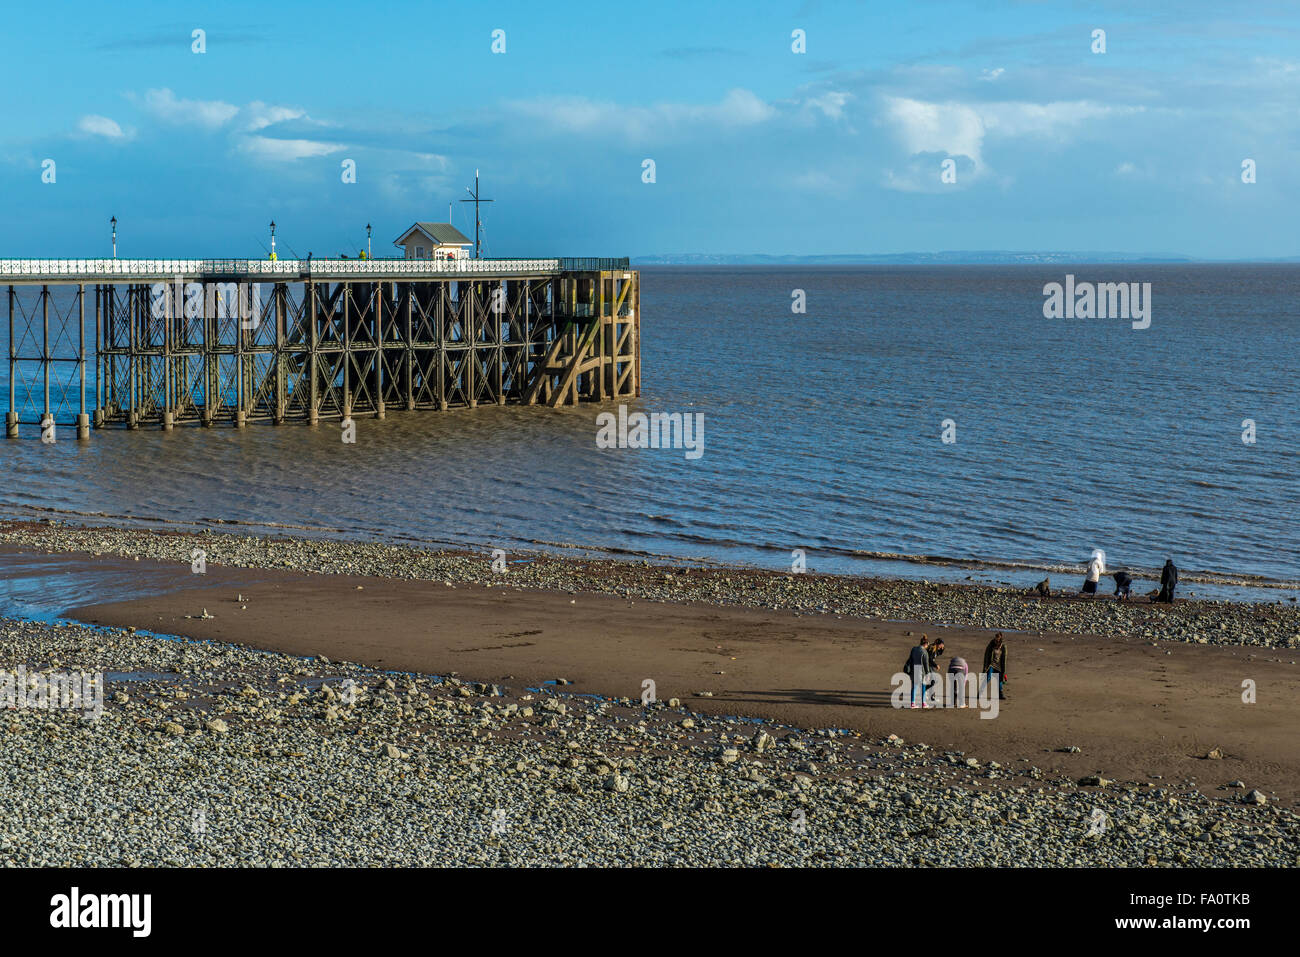 Penarth Pier and Beach with people playing on the Beach, in the Vale of Glamorgan, South Wales Stock Photo